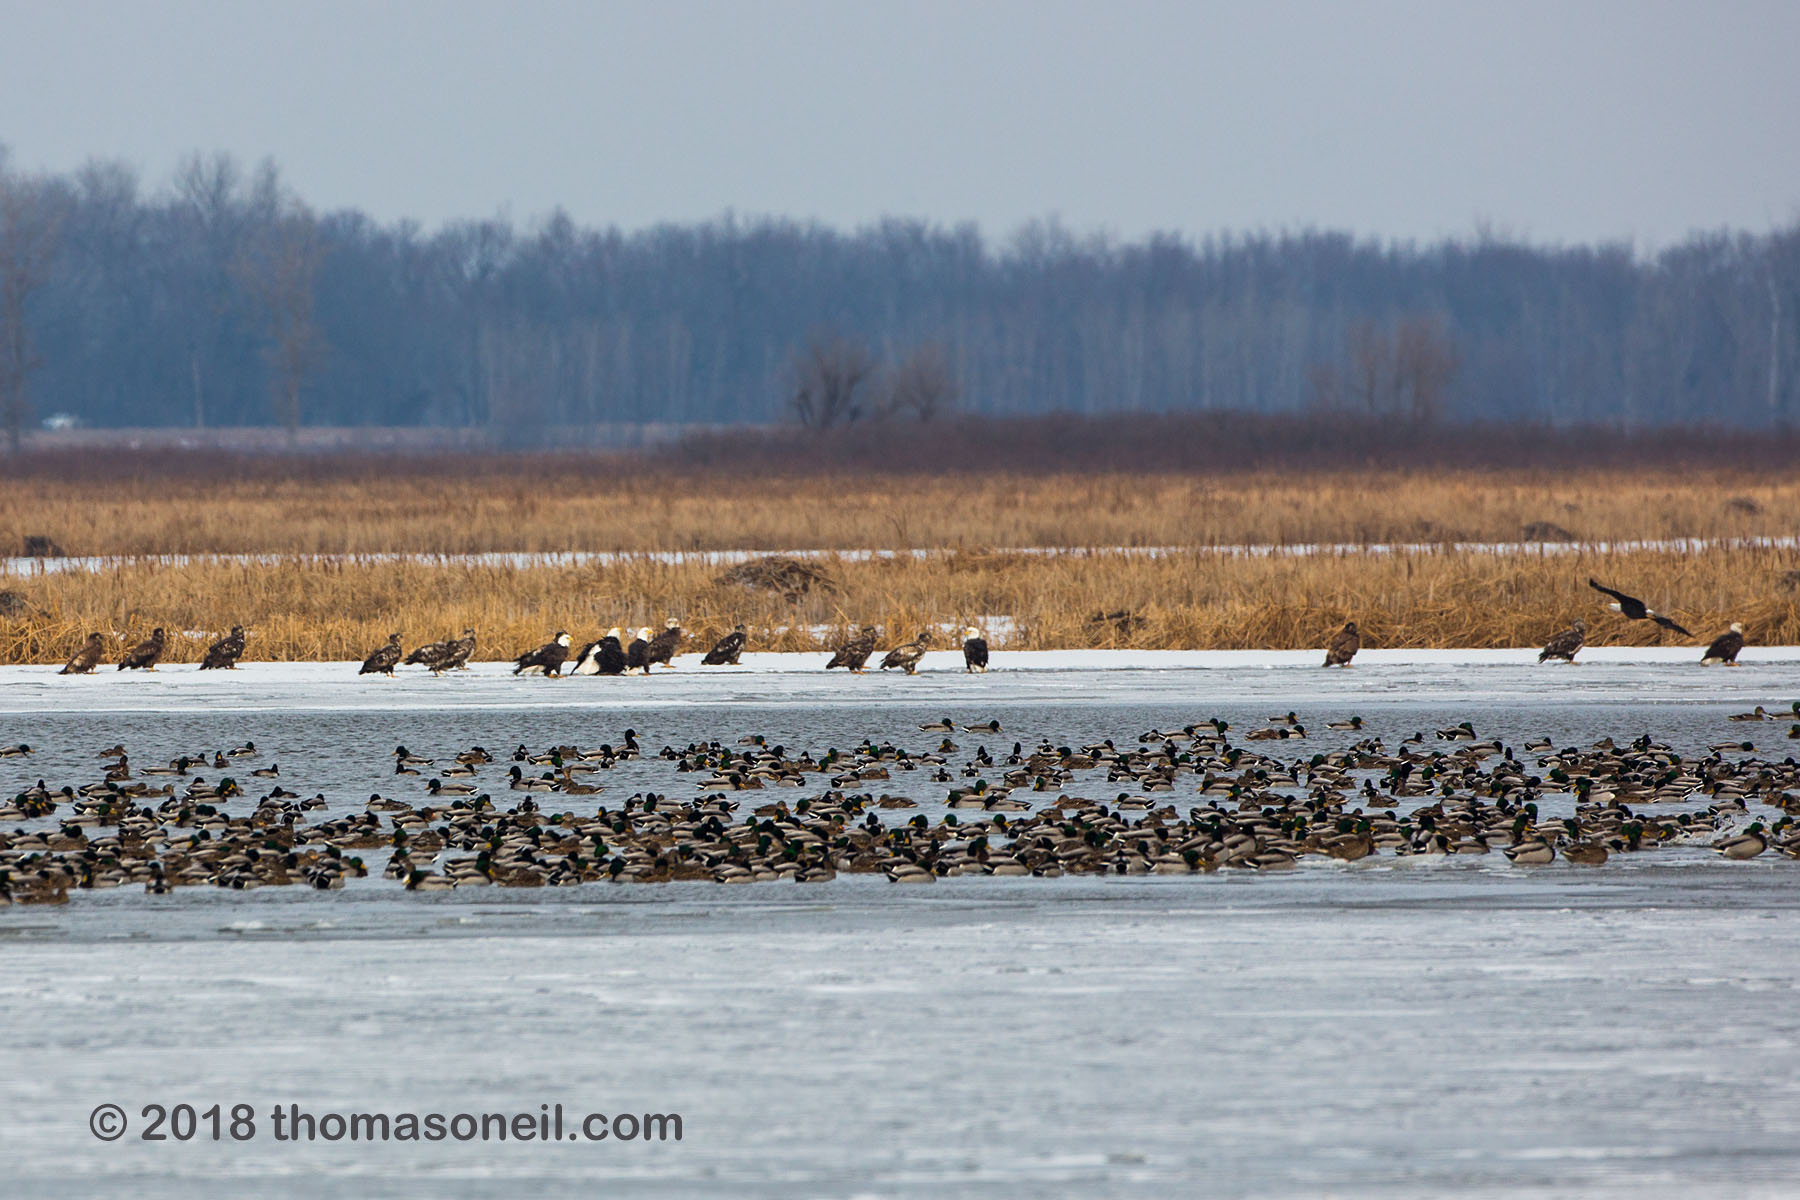 About 20 bald eagles on the ice keeping an eye on the ducks, Loess Bluffs National Wildlife Refuge, Missouri.  Click for next photo.